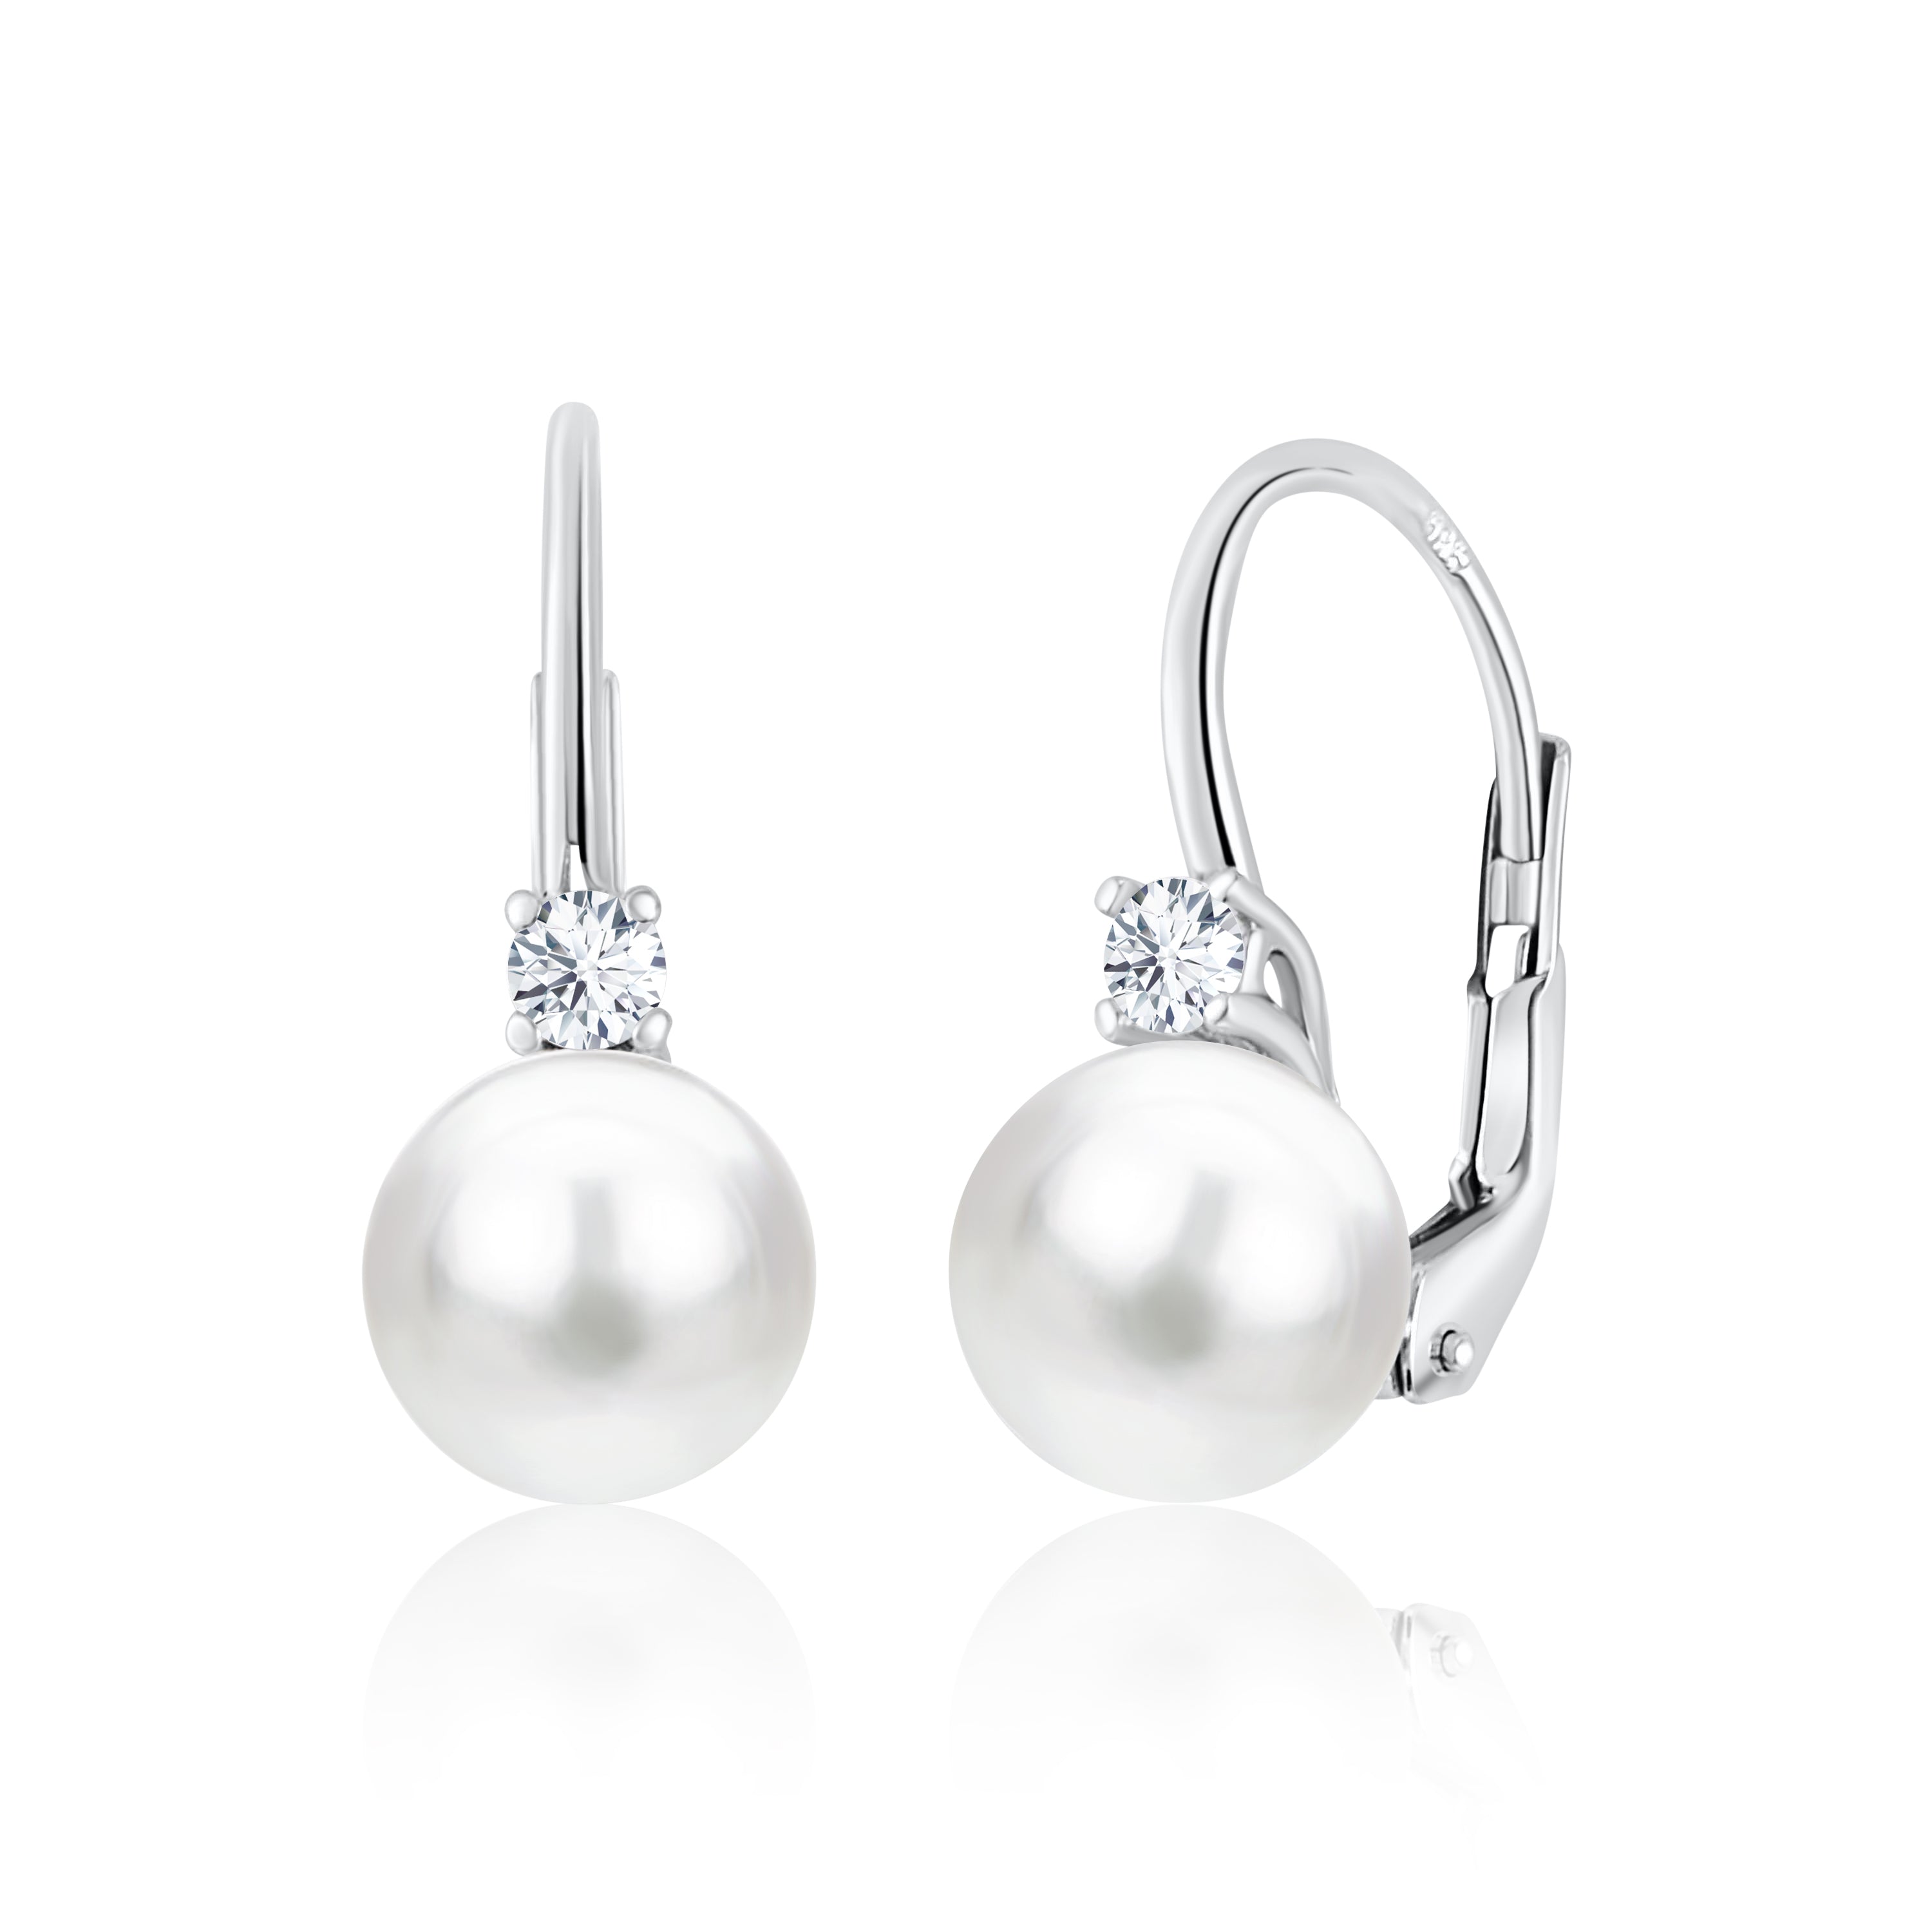 UNICORNJ 14K White Gold Freshwater Cultured Pearl Leverback Earrings with CZ Italy